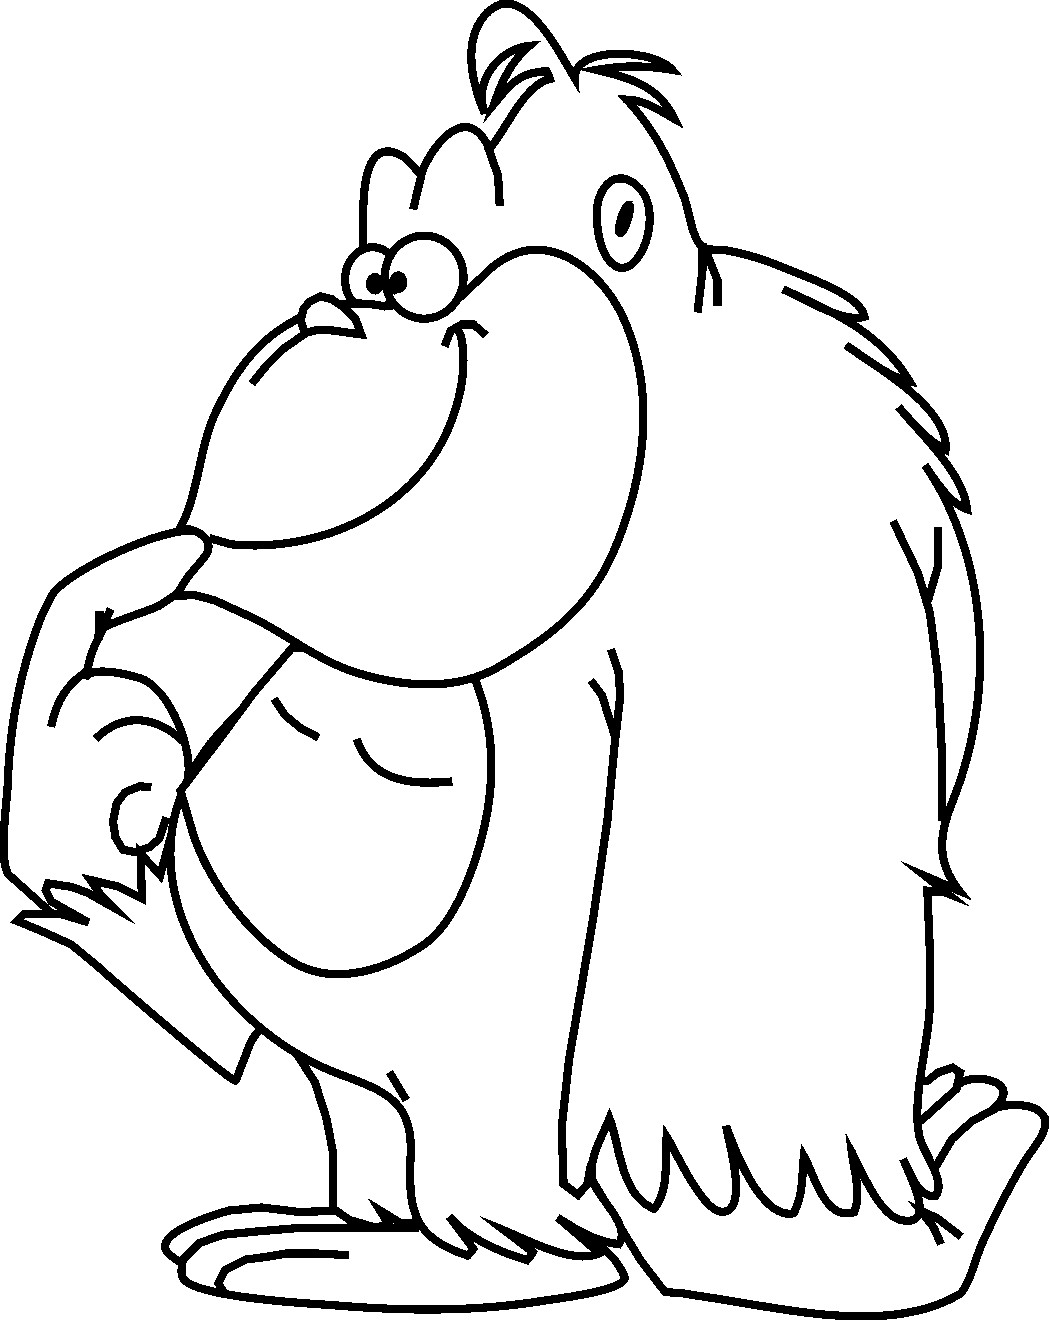 Easy Coloring Pages For Boys
 animal cartoon coloring pages